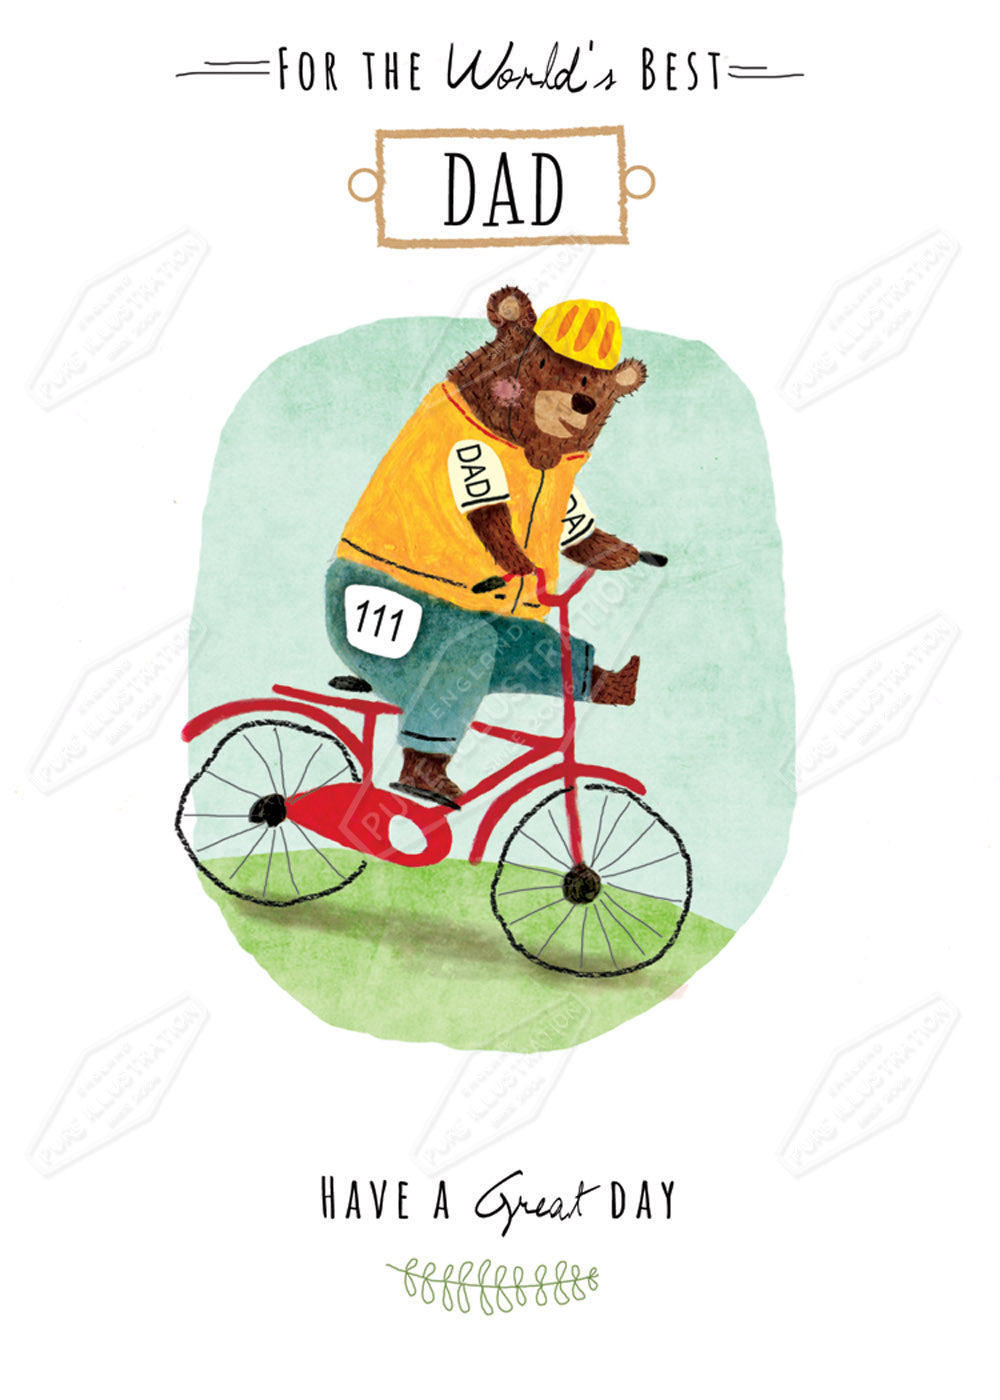 Dad Birthday / Father's Day Bear Greeting Card Design by Cory Reid for Pure Art Licensing & Surface Design Studio